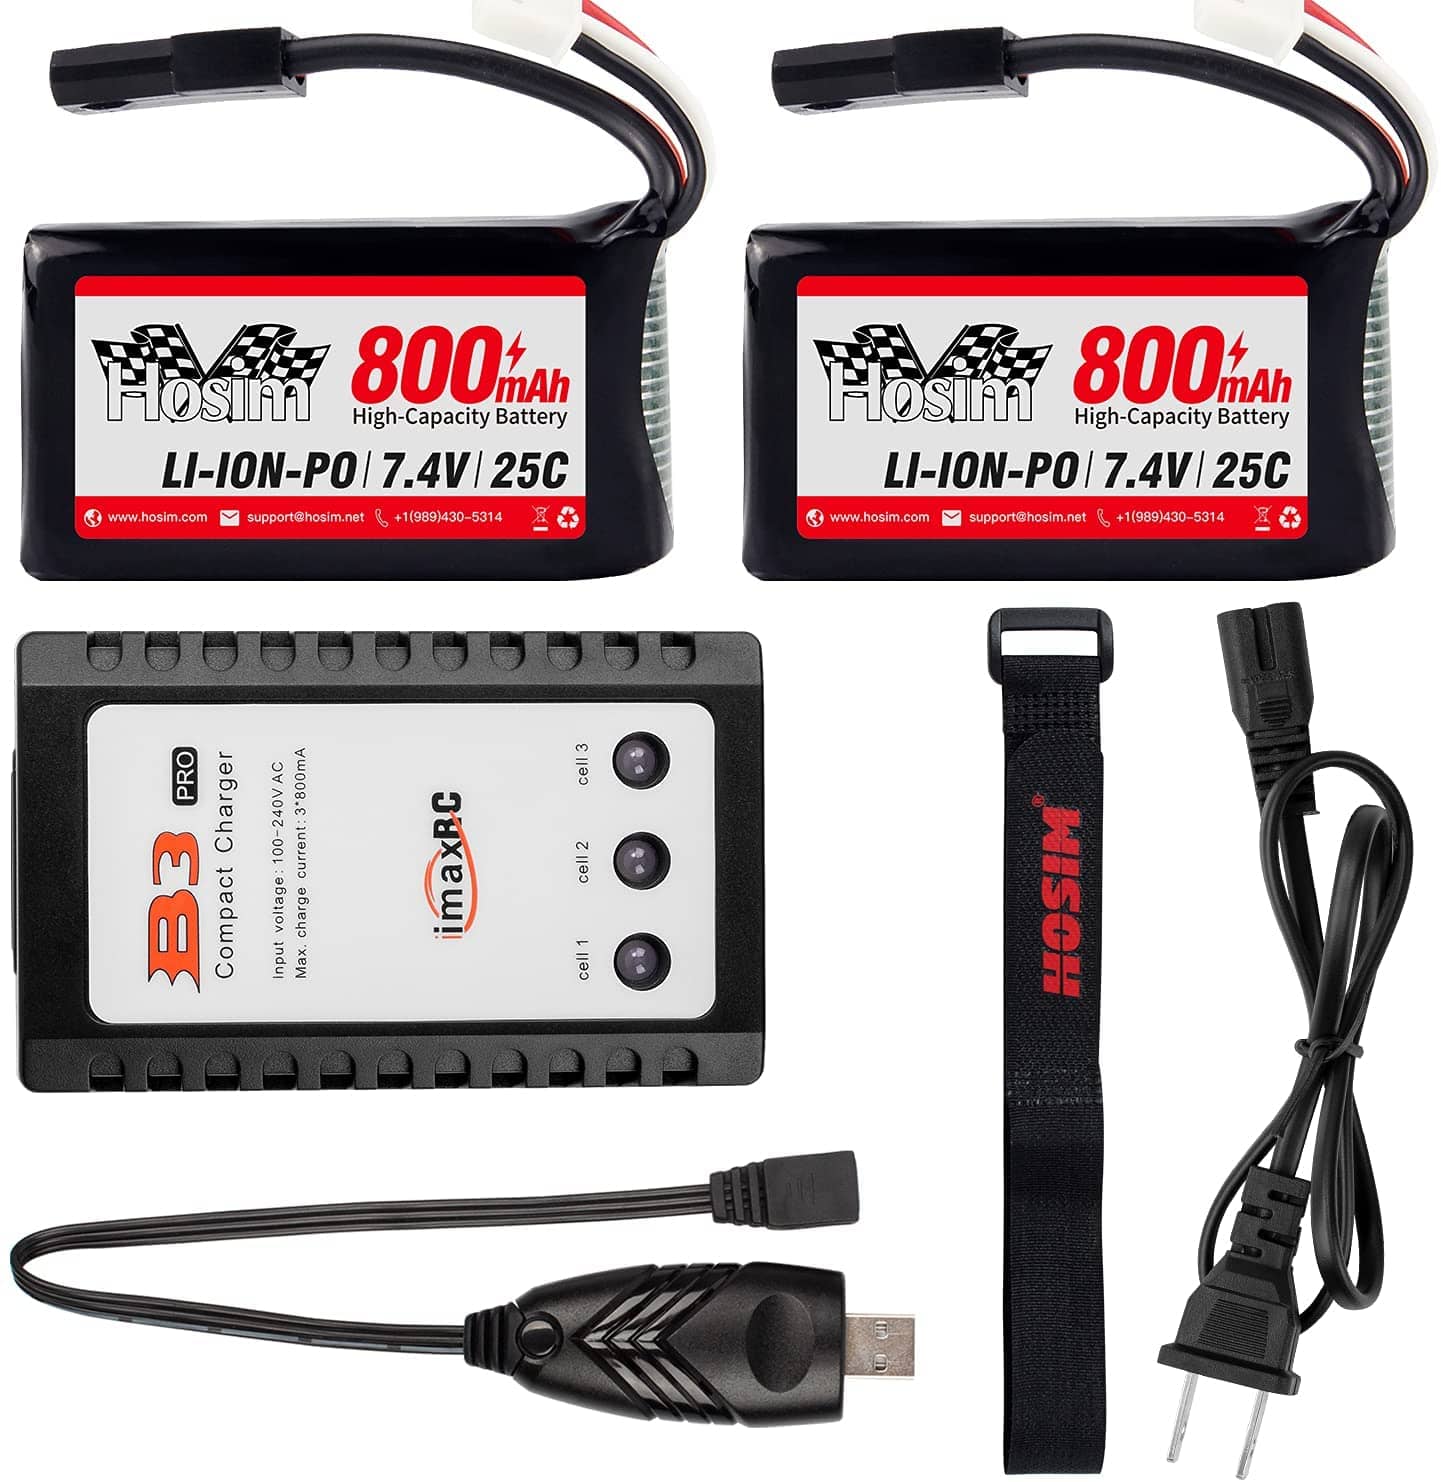 Hosim 2pcs 7.4V 800mAh RC Cars Rechargeable Li-Po Battery, 1 2AUSB, 1 Battery Bag, 1 Balance Charger, Spare Replacement Parts for 9130 9135 9136 9138 1/16 Scale All Terrain RC Trucks FPV